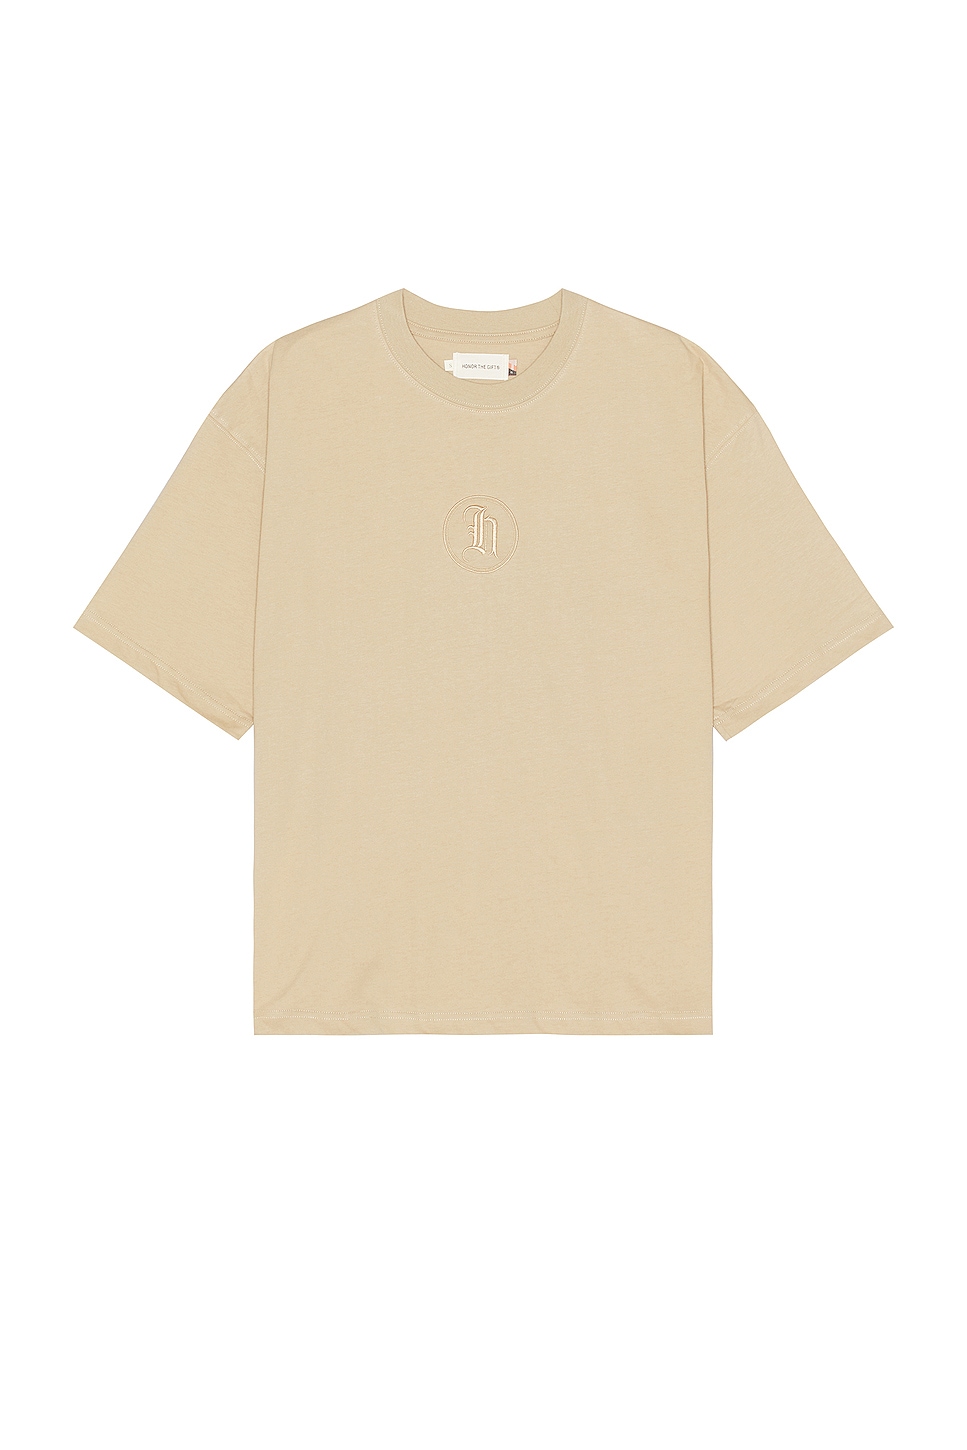 Image 1 of Honor The Gift H Stamp Box Tee in Tan